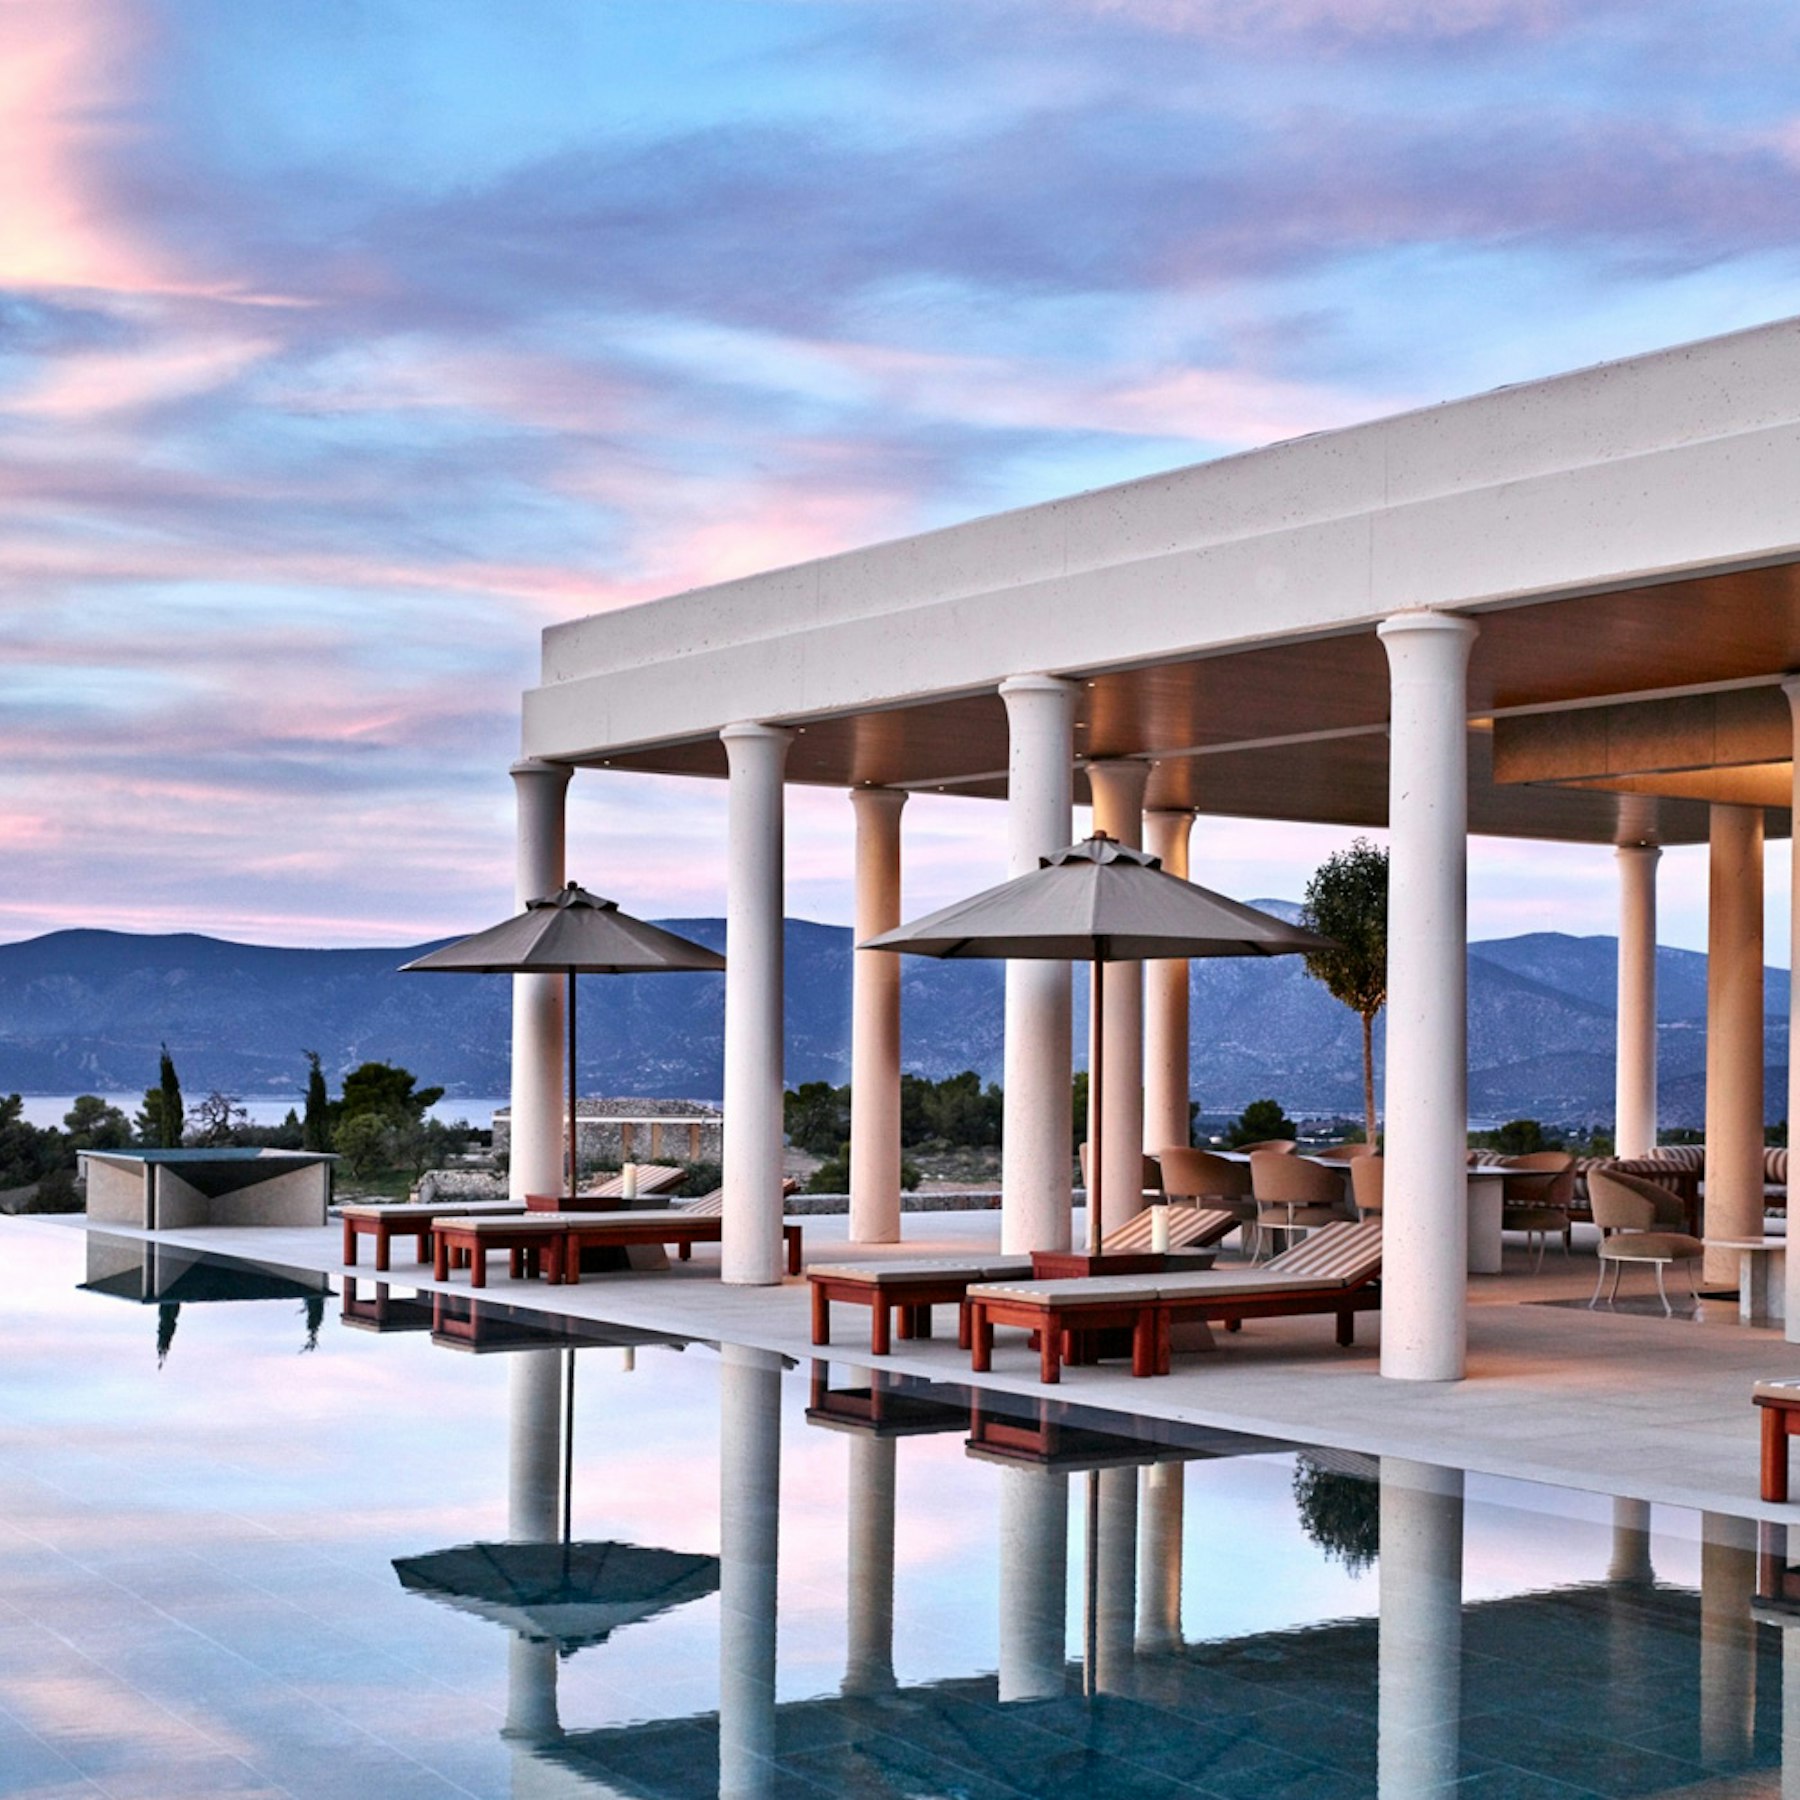 Amanzoe sea view from the pool